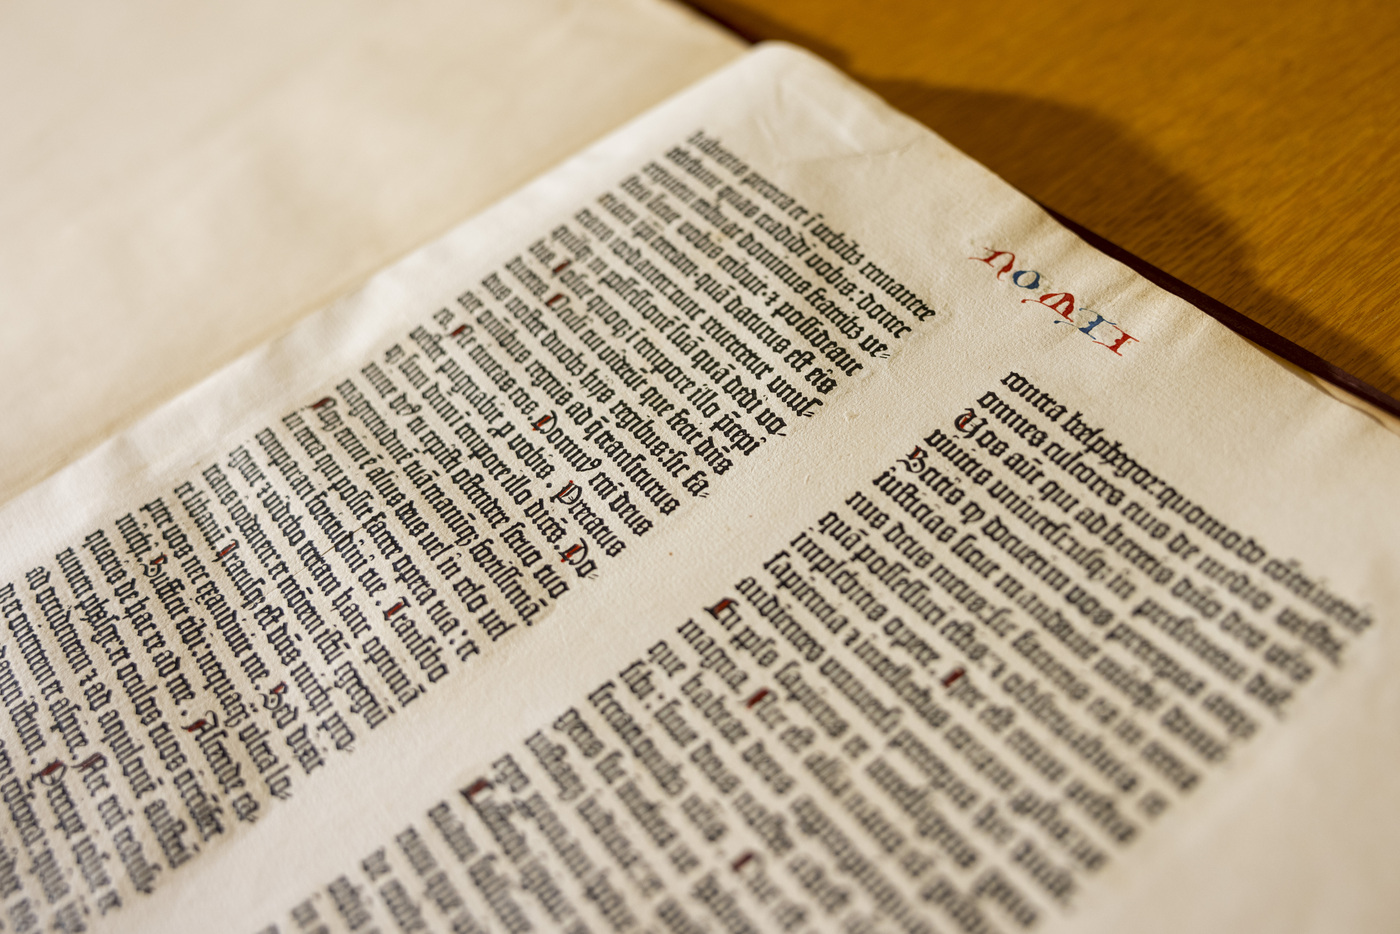 A page of the Gutenberg Bible